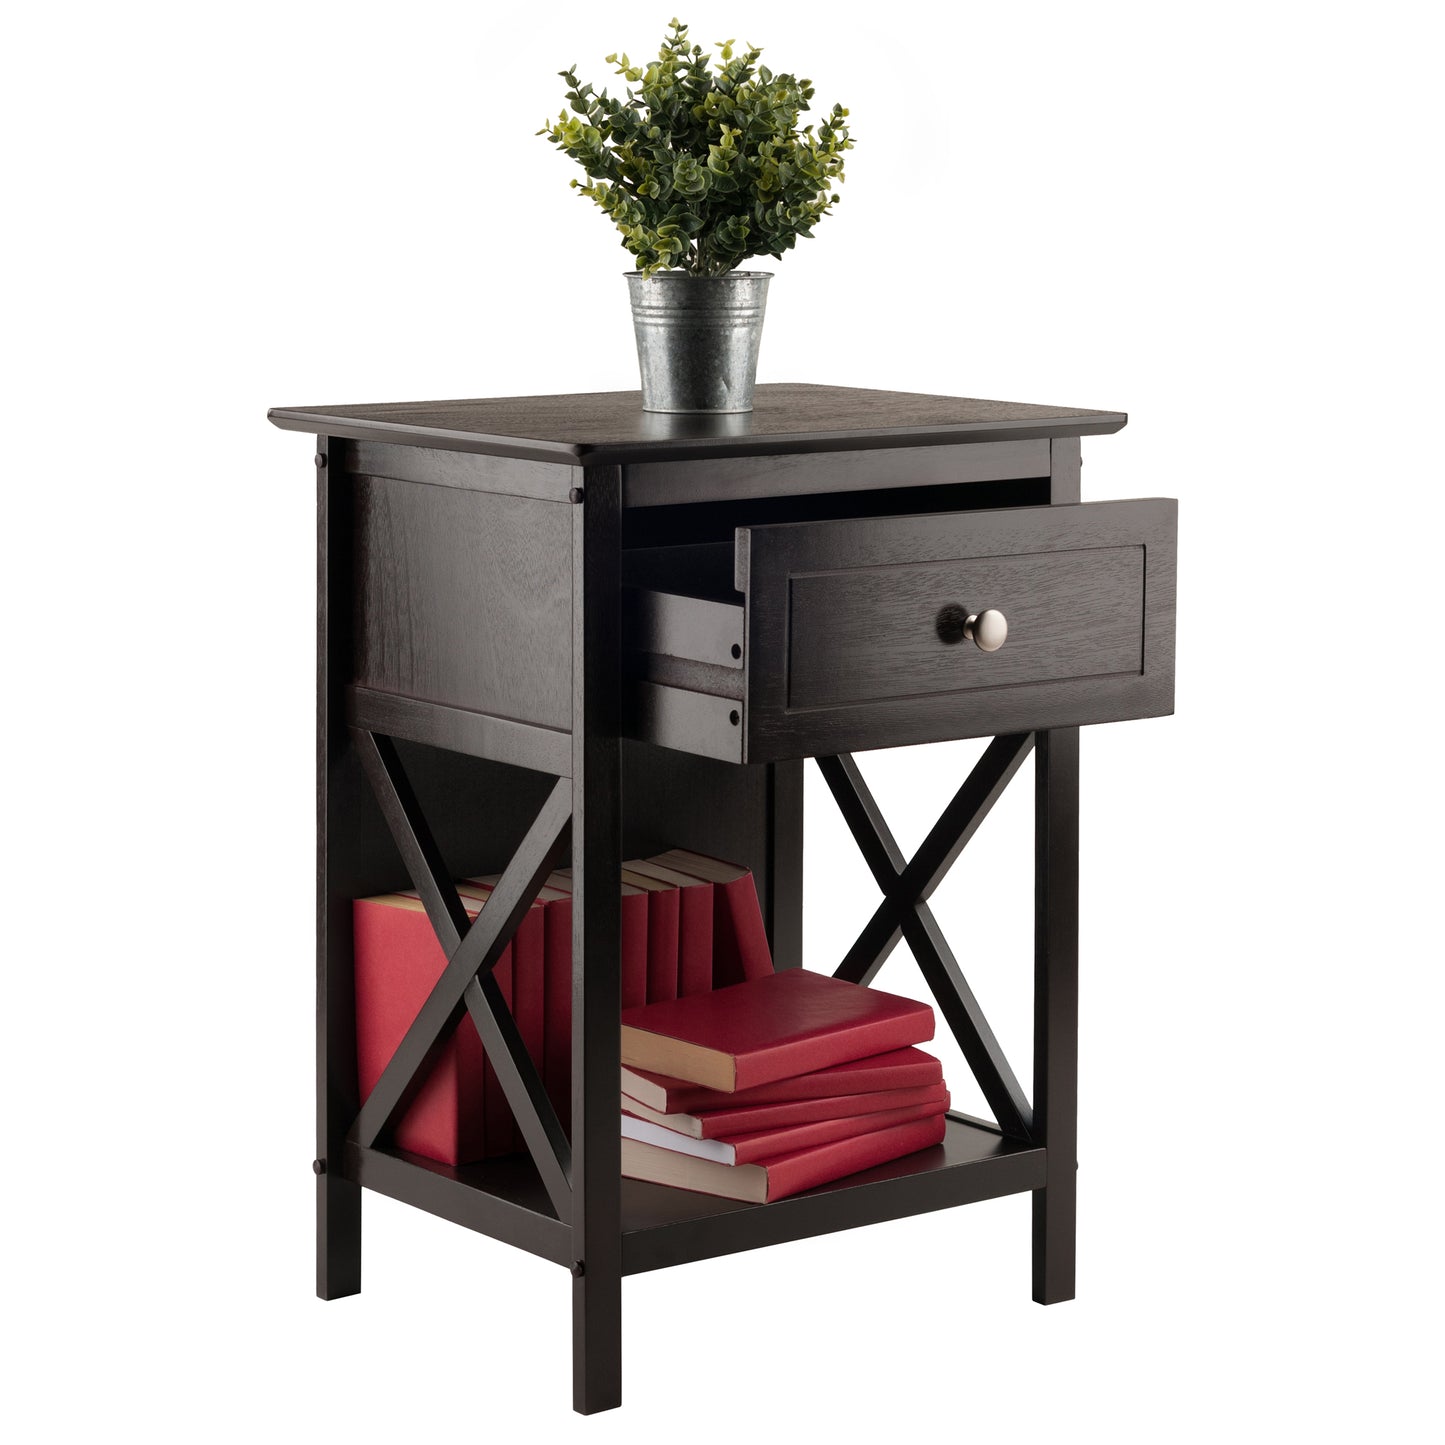 Xylia Accent Table, Nightstand, Coffee